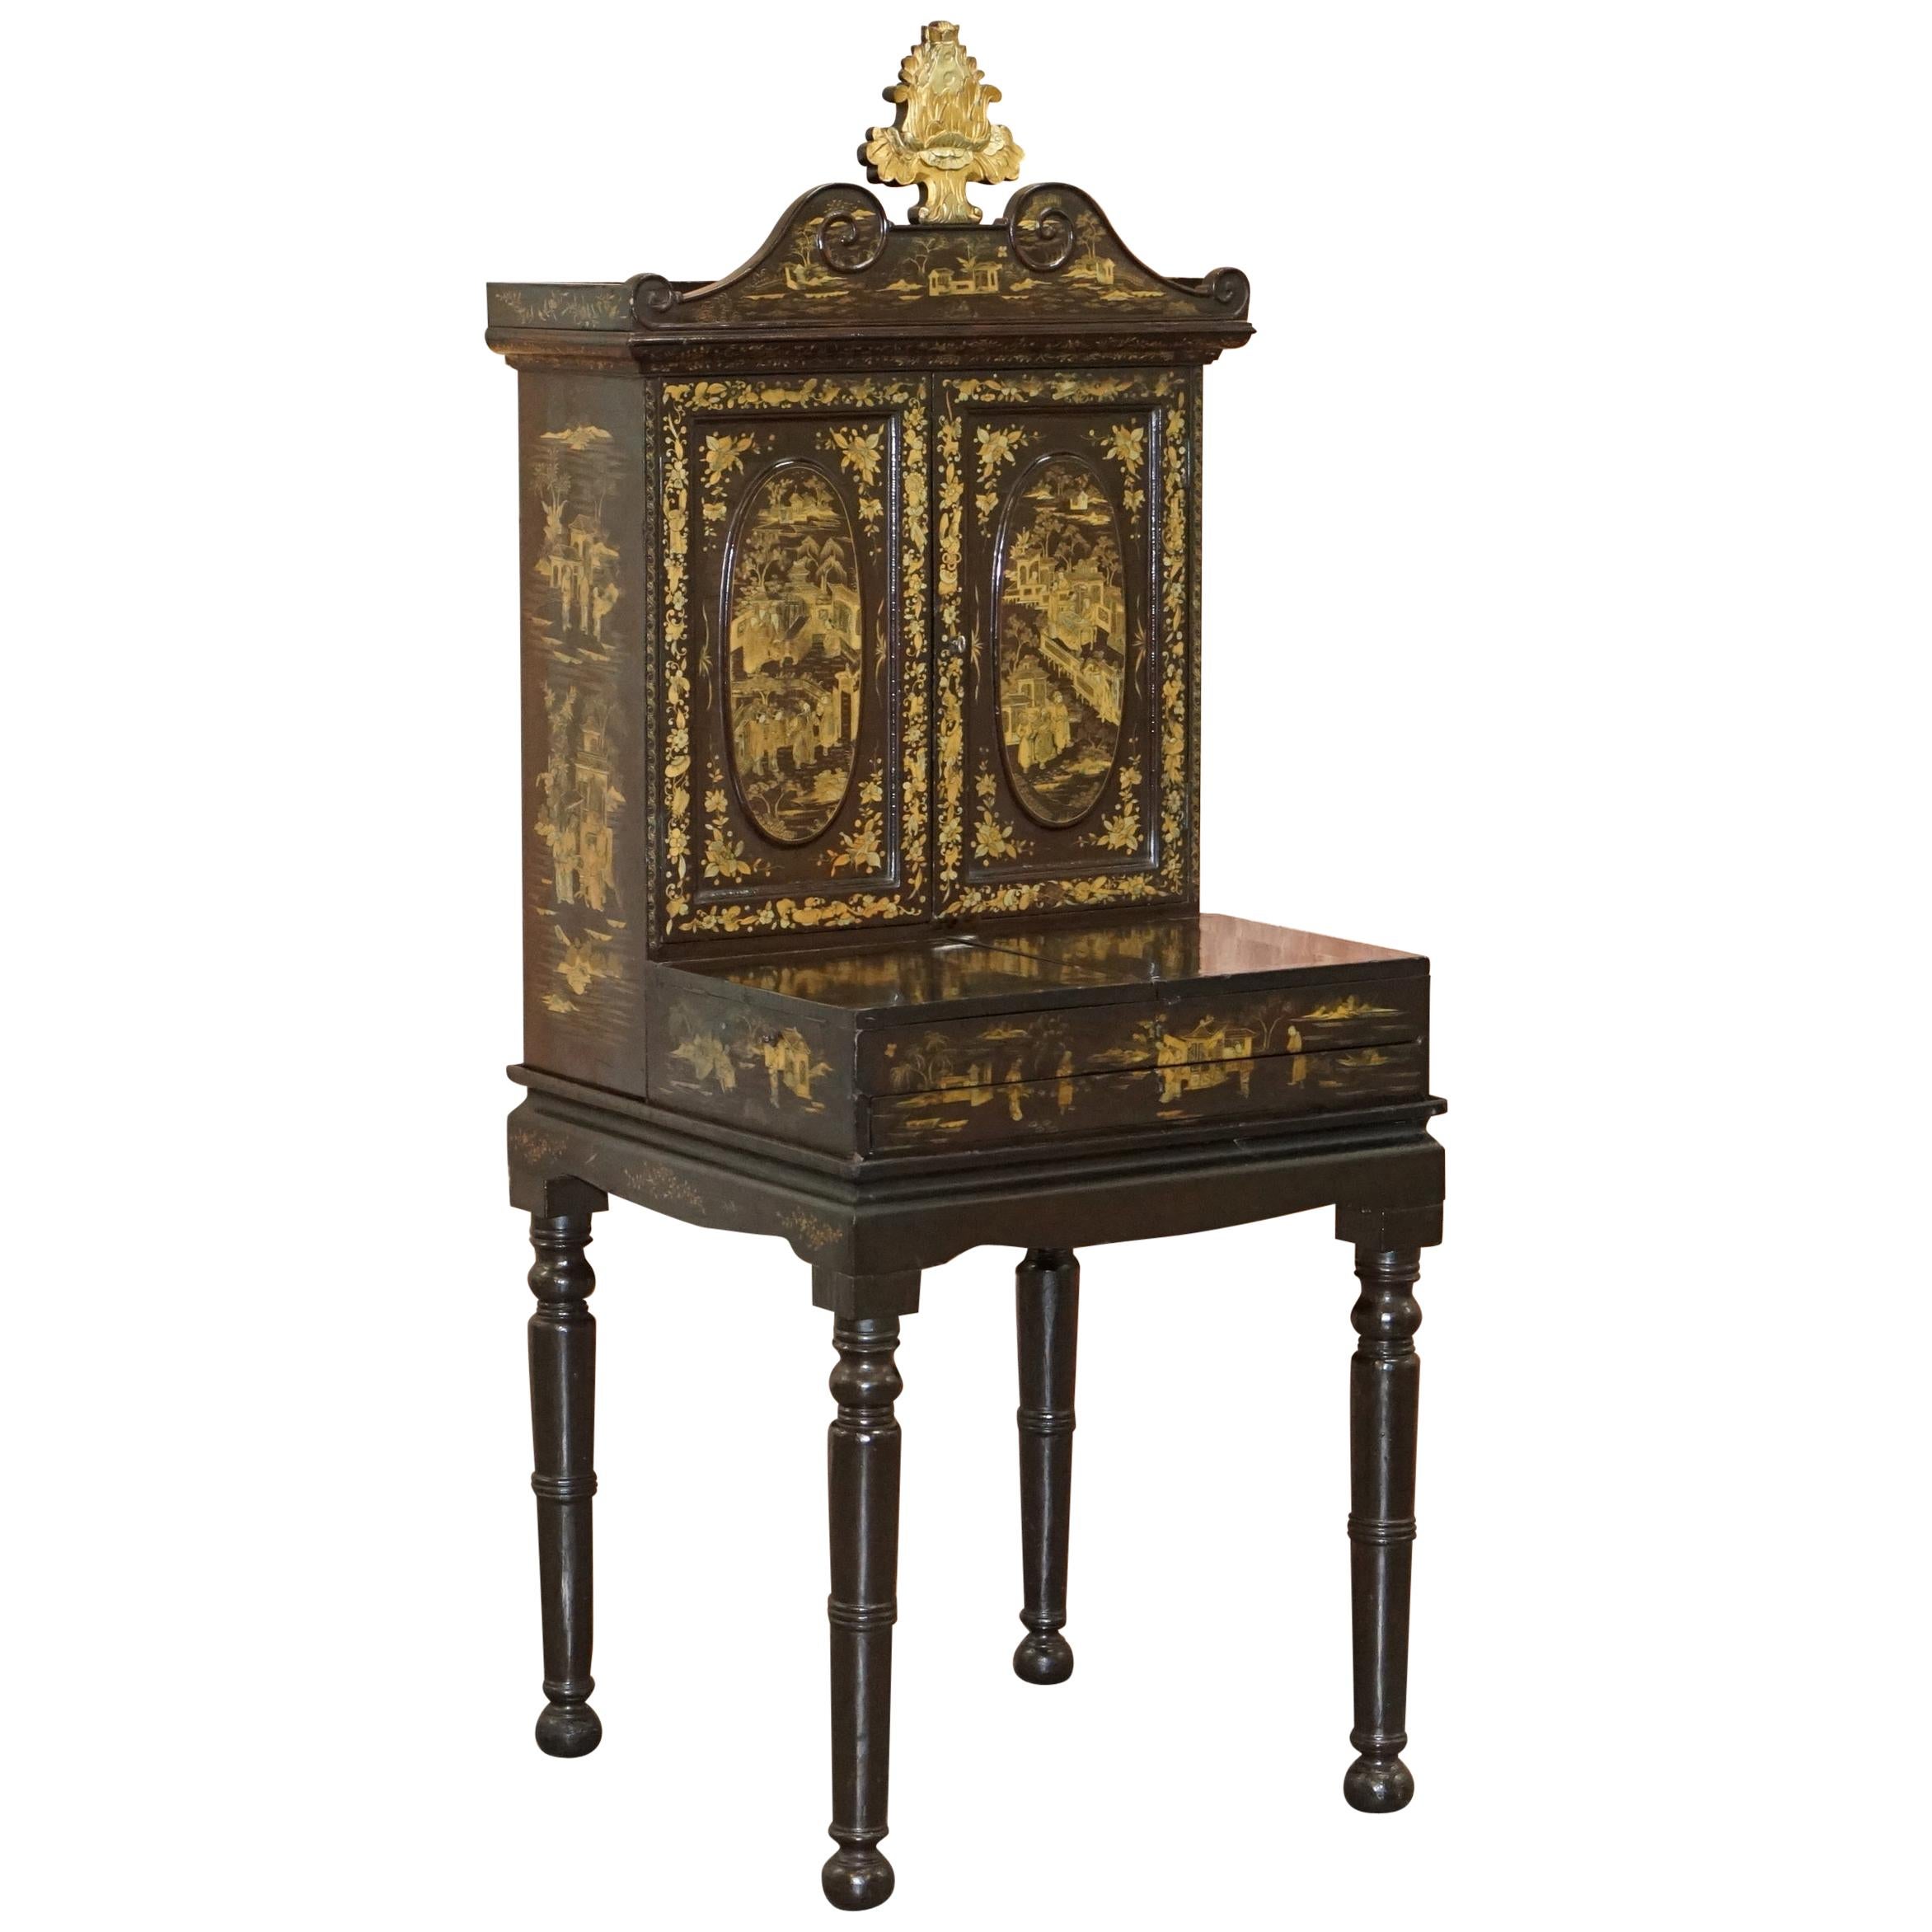 Sublime 19th Chinese Lacqurered Dressing Table Vanity Unit Writing Table or Desk For Sale